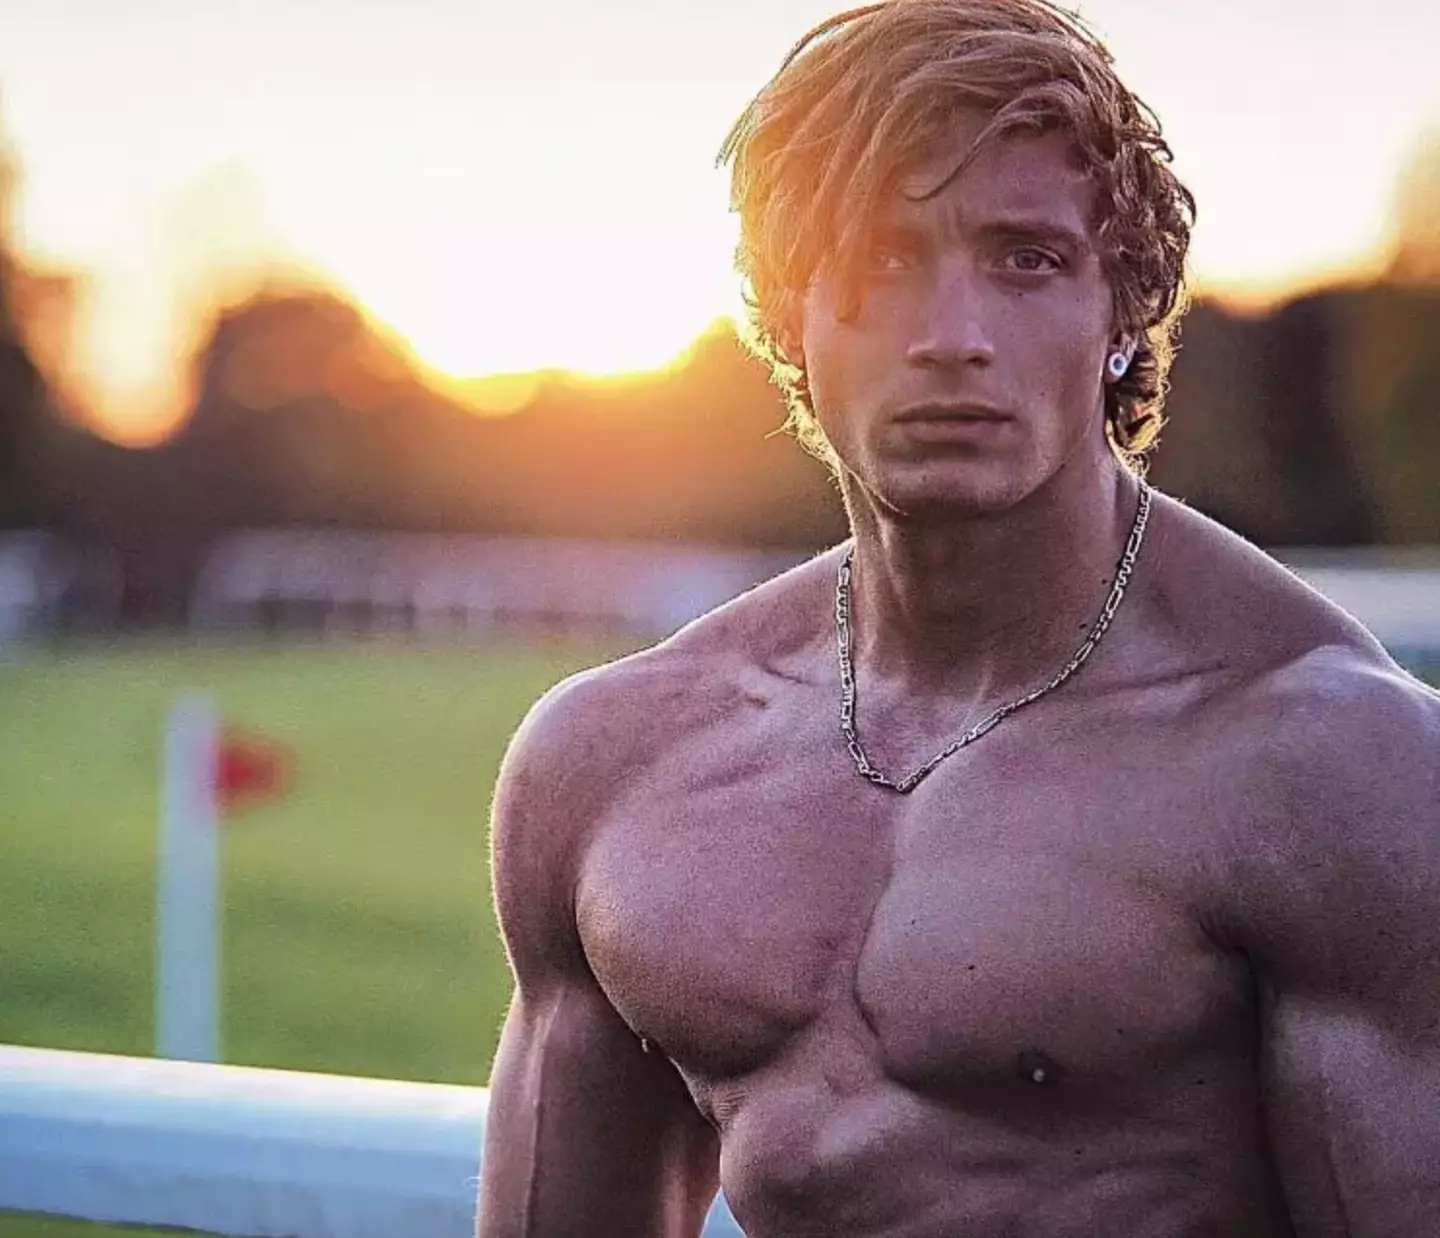 The fitness influencer tragically died at the age of 30.